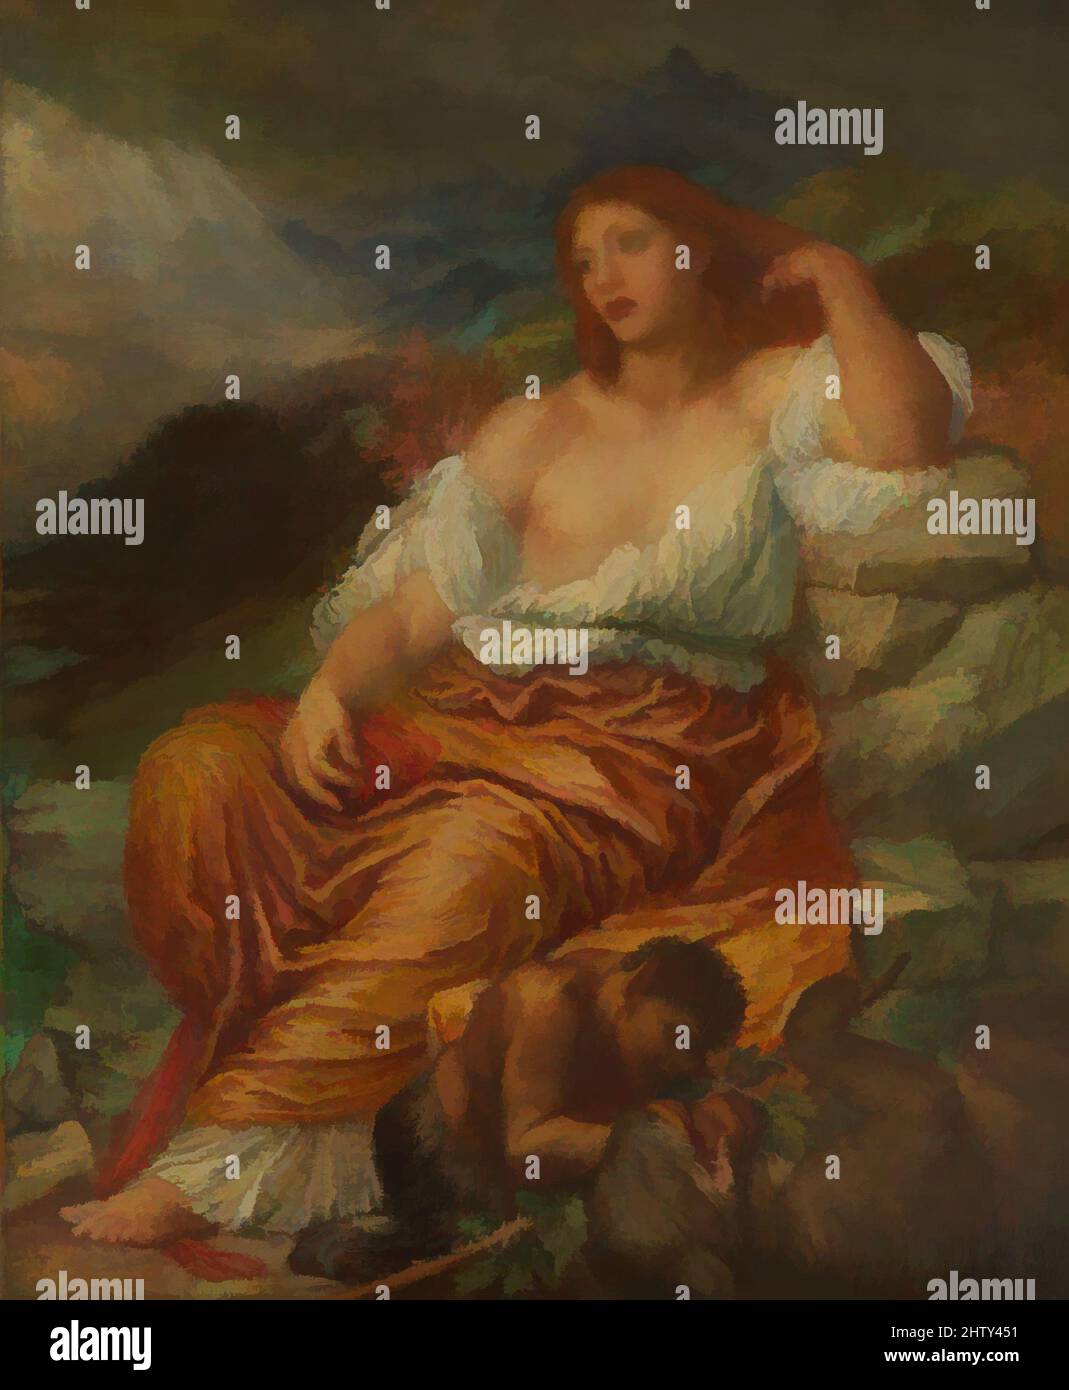 Art inspired by Ariadne, 1894, Oil on canvas, 24 x 20 in. (61 x 50.8 cm), Paintings, George Frederic Watts (British, London 1817–1904 London, Classic works modernized by Artotop with a splash of modernity. Shapes, color and value, eye-catching visual impact on art. Emotions through freedom of artworks in a contemporary way. A timeless message pursuing a wildly creative new direction. Artists turning to the digital medium and creating the Artotop NFT Stock Photo